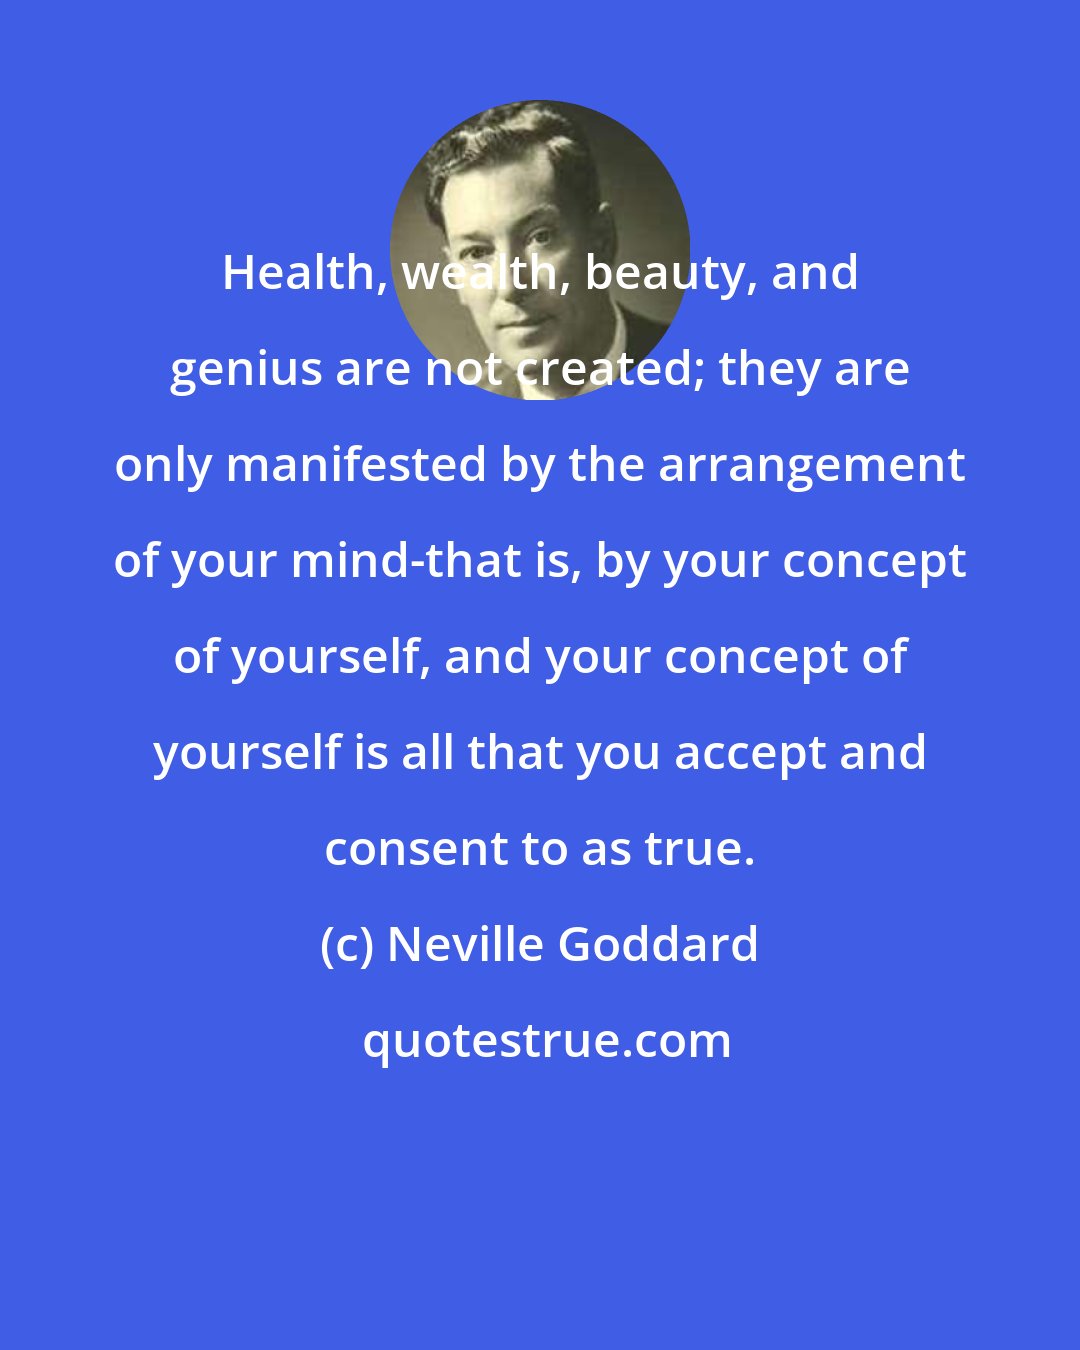 Neville Goddard: Health, wealth, beauty, and genius are not created; they are only manifested by the arrangement of your mind-that is, by your concept of yourself, and your concept of yourself is all that you accept and consent to as true.